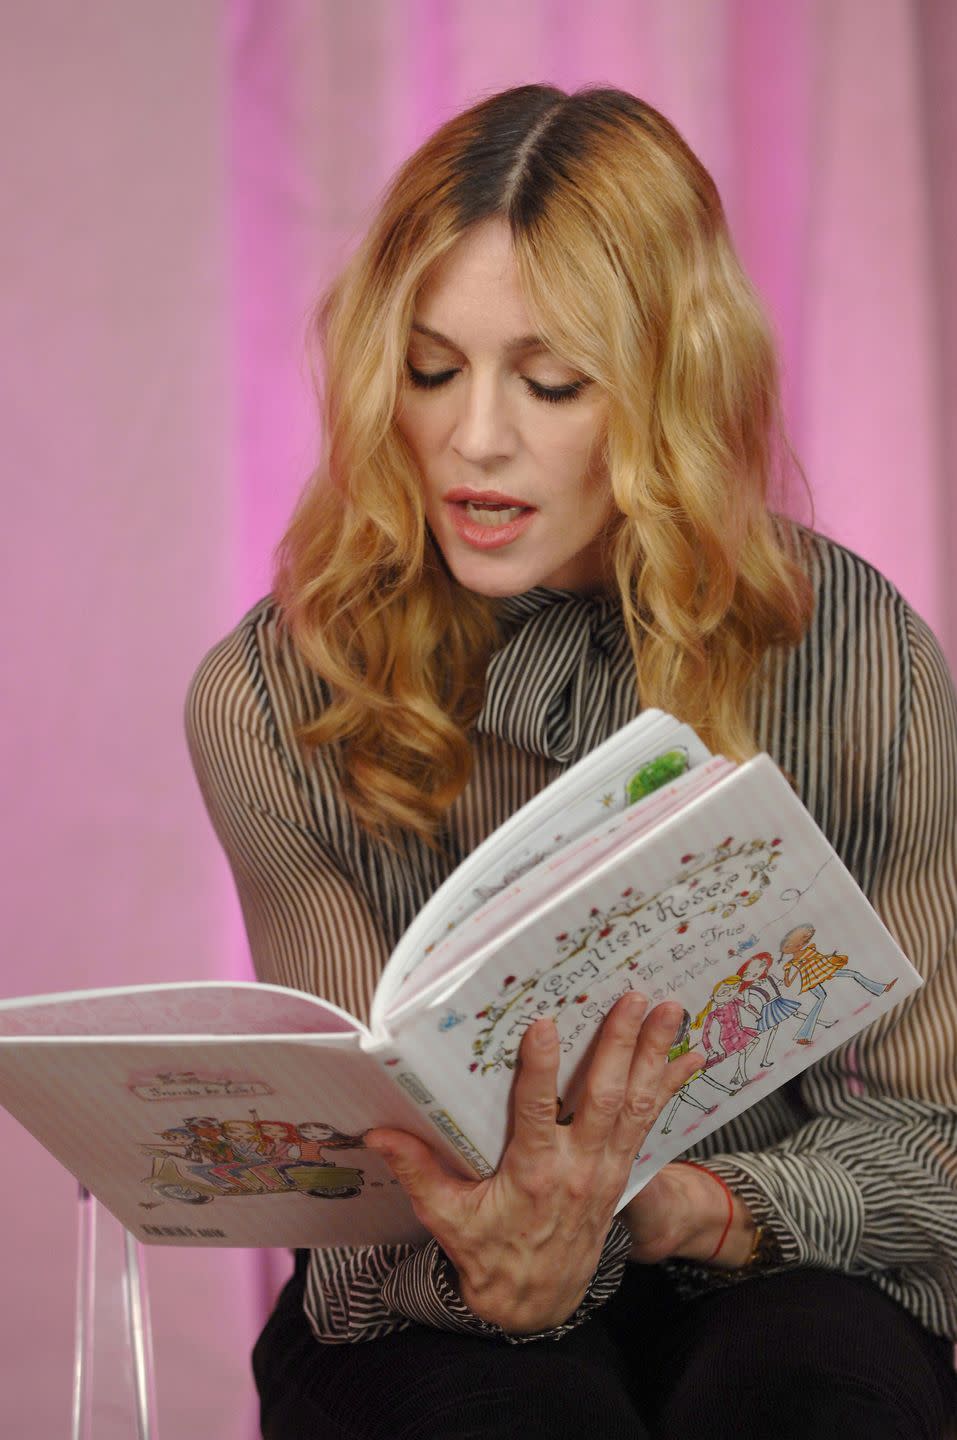 <p>Madonna has worked on 30 books—11 coffee table books, 12 chapter books, and seven picture books for kids. In terms of her writing career, the Grammy and Academy Award winner is probably best known for her <em>English Roses</em> series, the first of which was published in 2003. </p><p>The books follow the friendship of five girls, and the ups and downs that come with it, and are named after group of friends Madonna's daughter plays with at school, she told <em><a href="https://www.publishersweekly.com/pw/by-topic/authors/interviews/article/33935-mum-s-the-word-pw-talks-with-madonna.html" rel="nofollow noopener" target="_blank" data-ylk="slk:Publishers Weekly" class="link ">Publishers Weekly</a></em>. The idea for the series was planted by the Queen of Pop's Kabbalah teacher, who suggested she write children's books to "share the wisdom you've gained as an adult." The first book in the series debuted at number one on the <em><a href="https://sanoma.com/release/madonnas-book-the-english-roses-debuts-at-no-1-on-the-new-york-times-childrens-best-seller-list/" rel="nofollow noopener" target="_blank" data-ylk="slk:New York Times" class="link ">New York Times</a></em> children's bestsellers list. <br></p><p><a class="link " href="https://www.amazon.com/English-Roses-Madonna/dp/0670036781?tag=syn-yahoo-20&ascsubtag=%5Bartid%7C2140.g.33987725%5Bsrc%7Cyahoo-us" rel="nofollow noopener" target="_blank" data-ylk="slk:Buy the Book">Buy the Book</a></p>